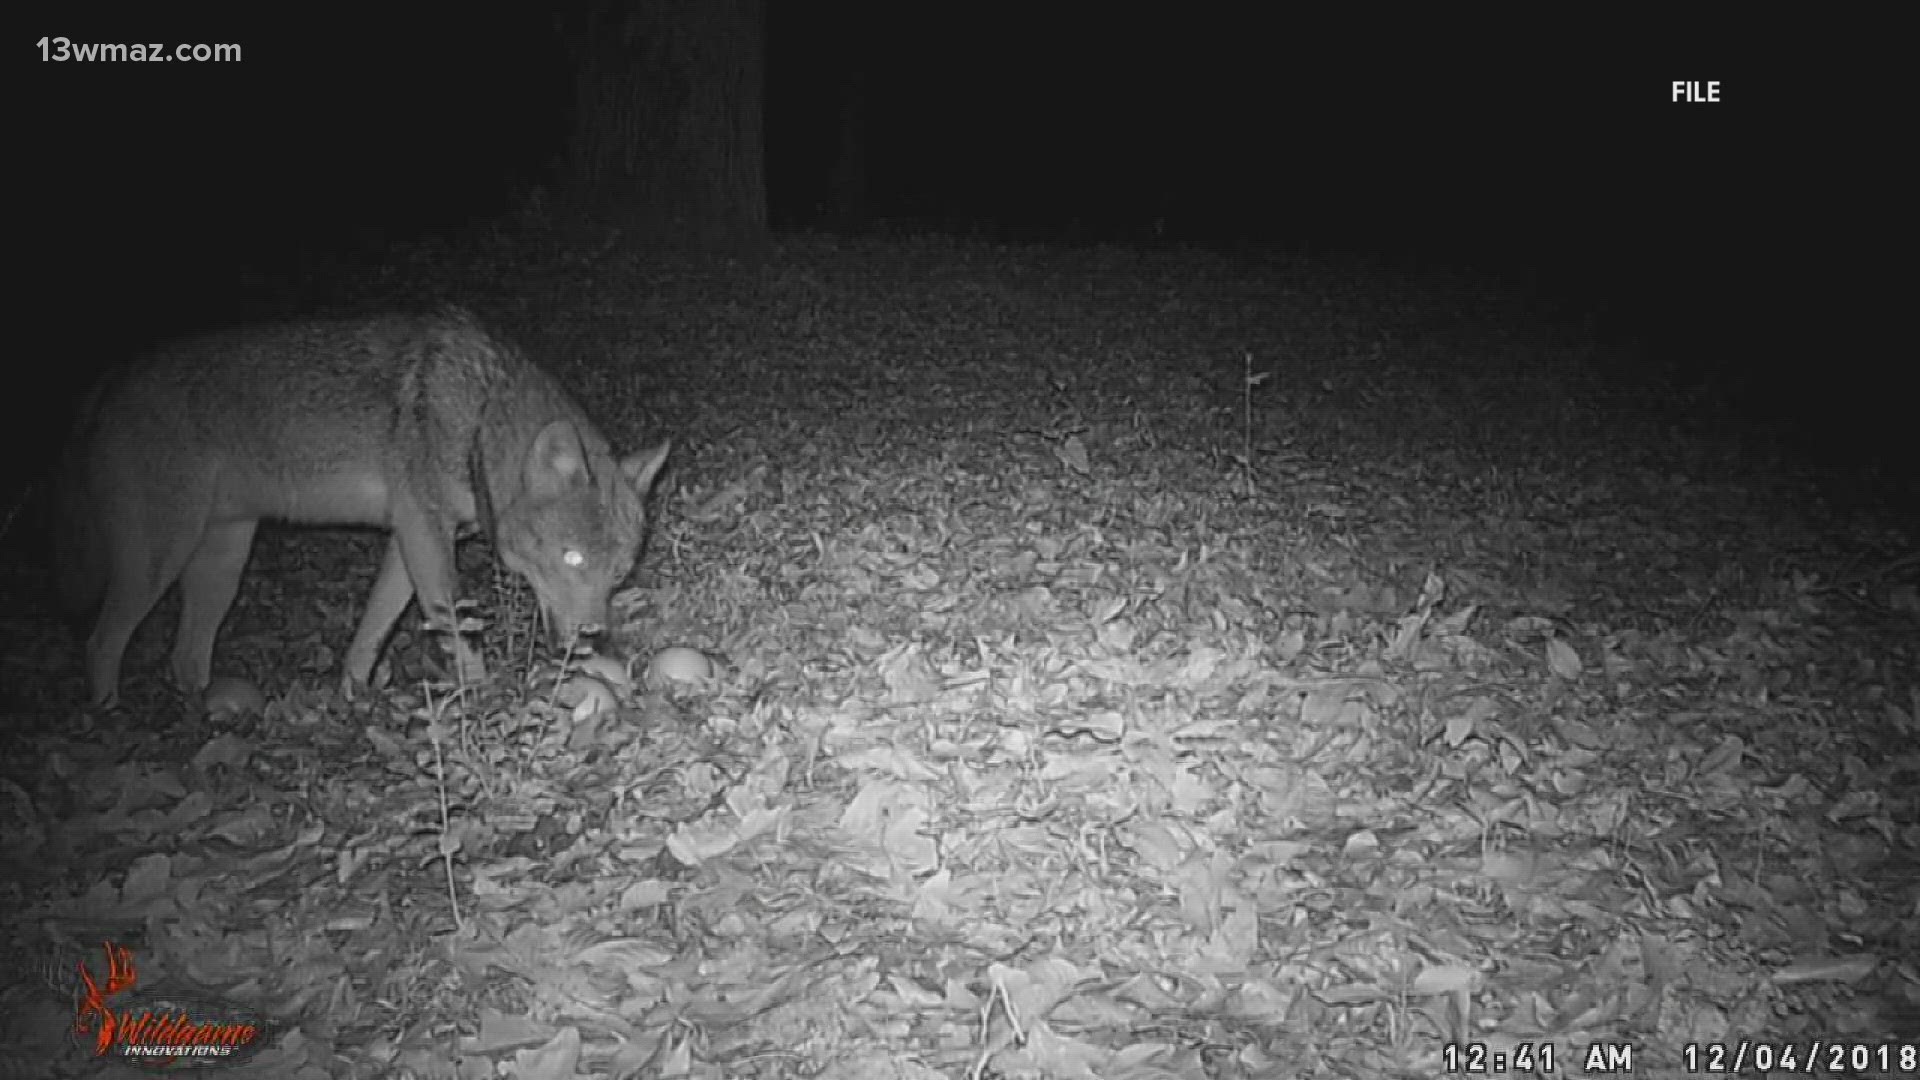 Coyote mating season starts in January until March. The Humane Society of Houston County wants pet owners to be on high alert.